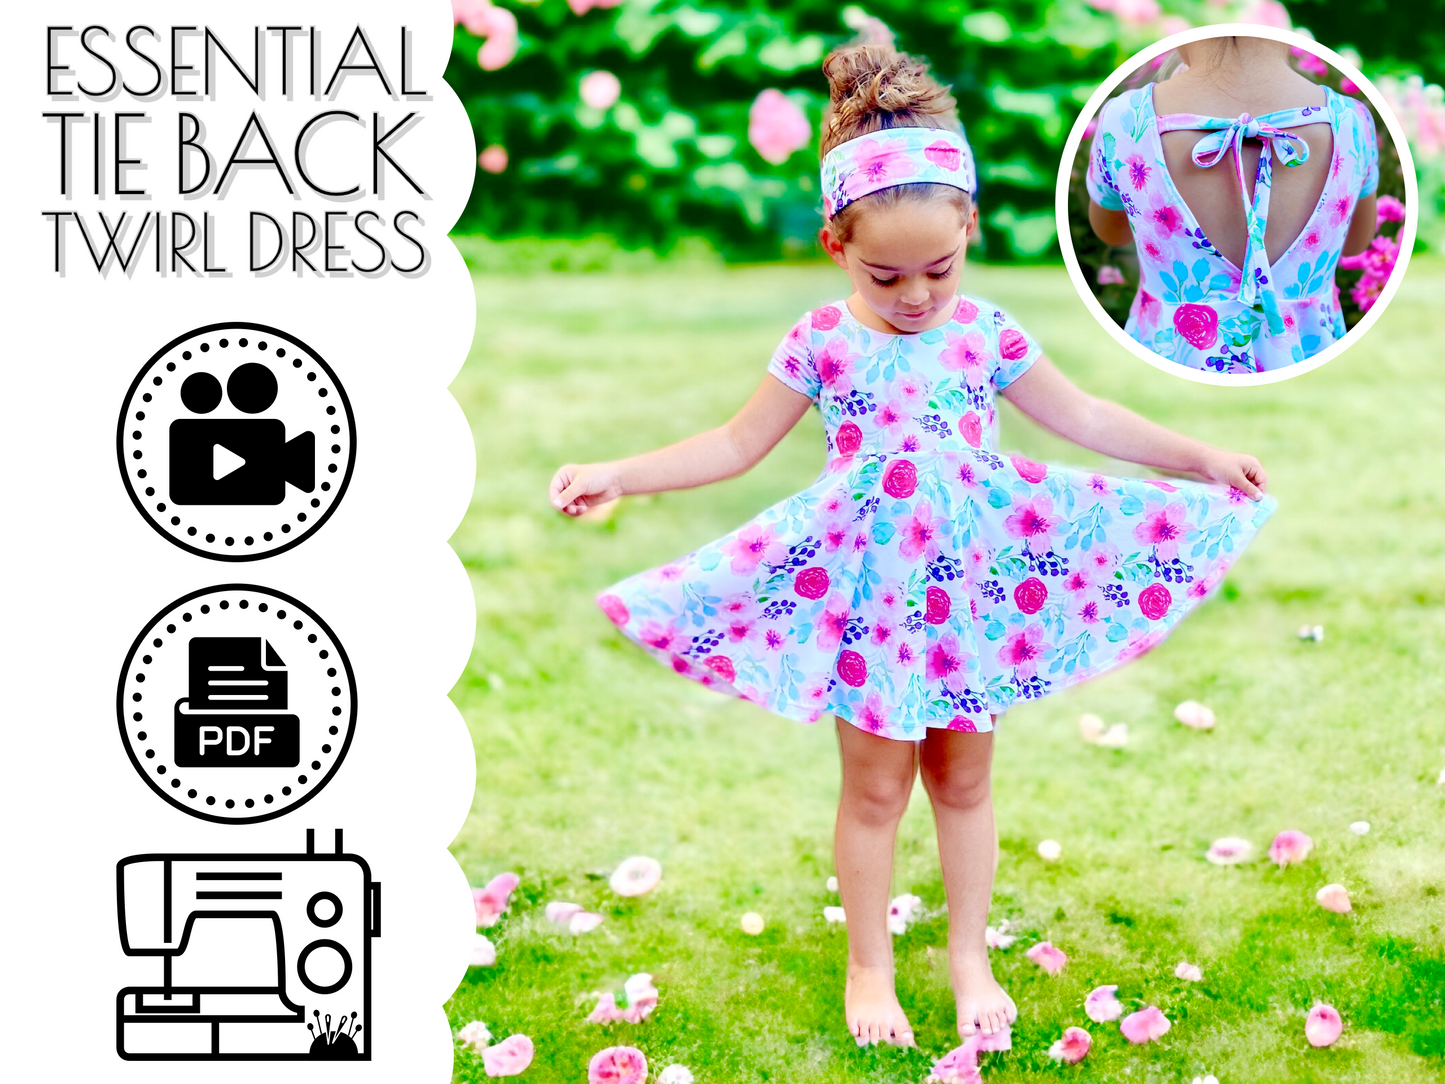 baby and girls tie back twirl dress sewing pattern for beginners with an open back that ties. Sew with a regular sewing machine or a serger!